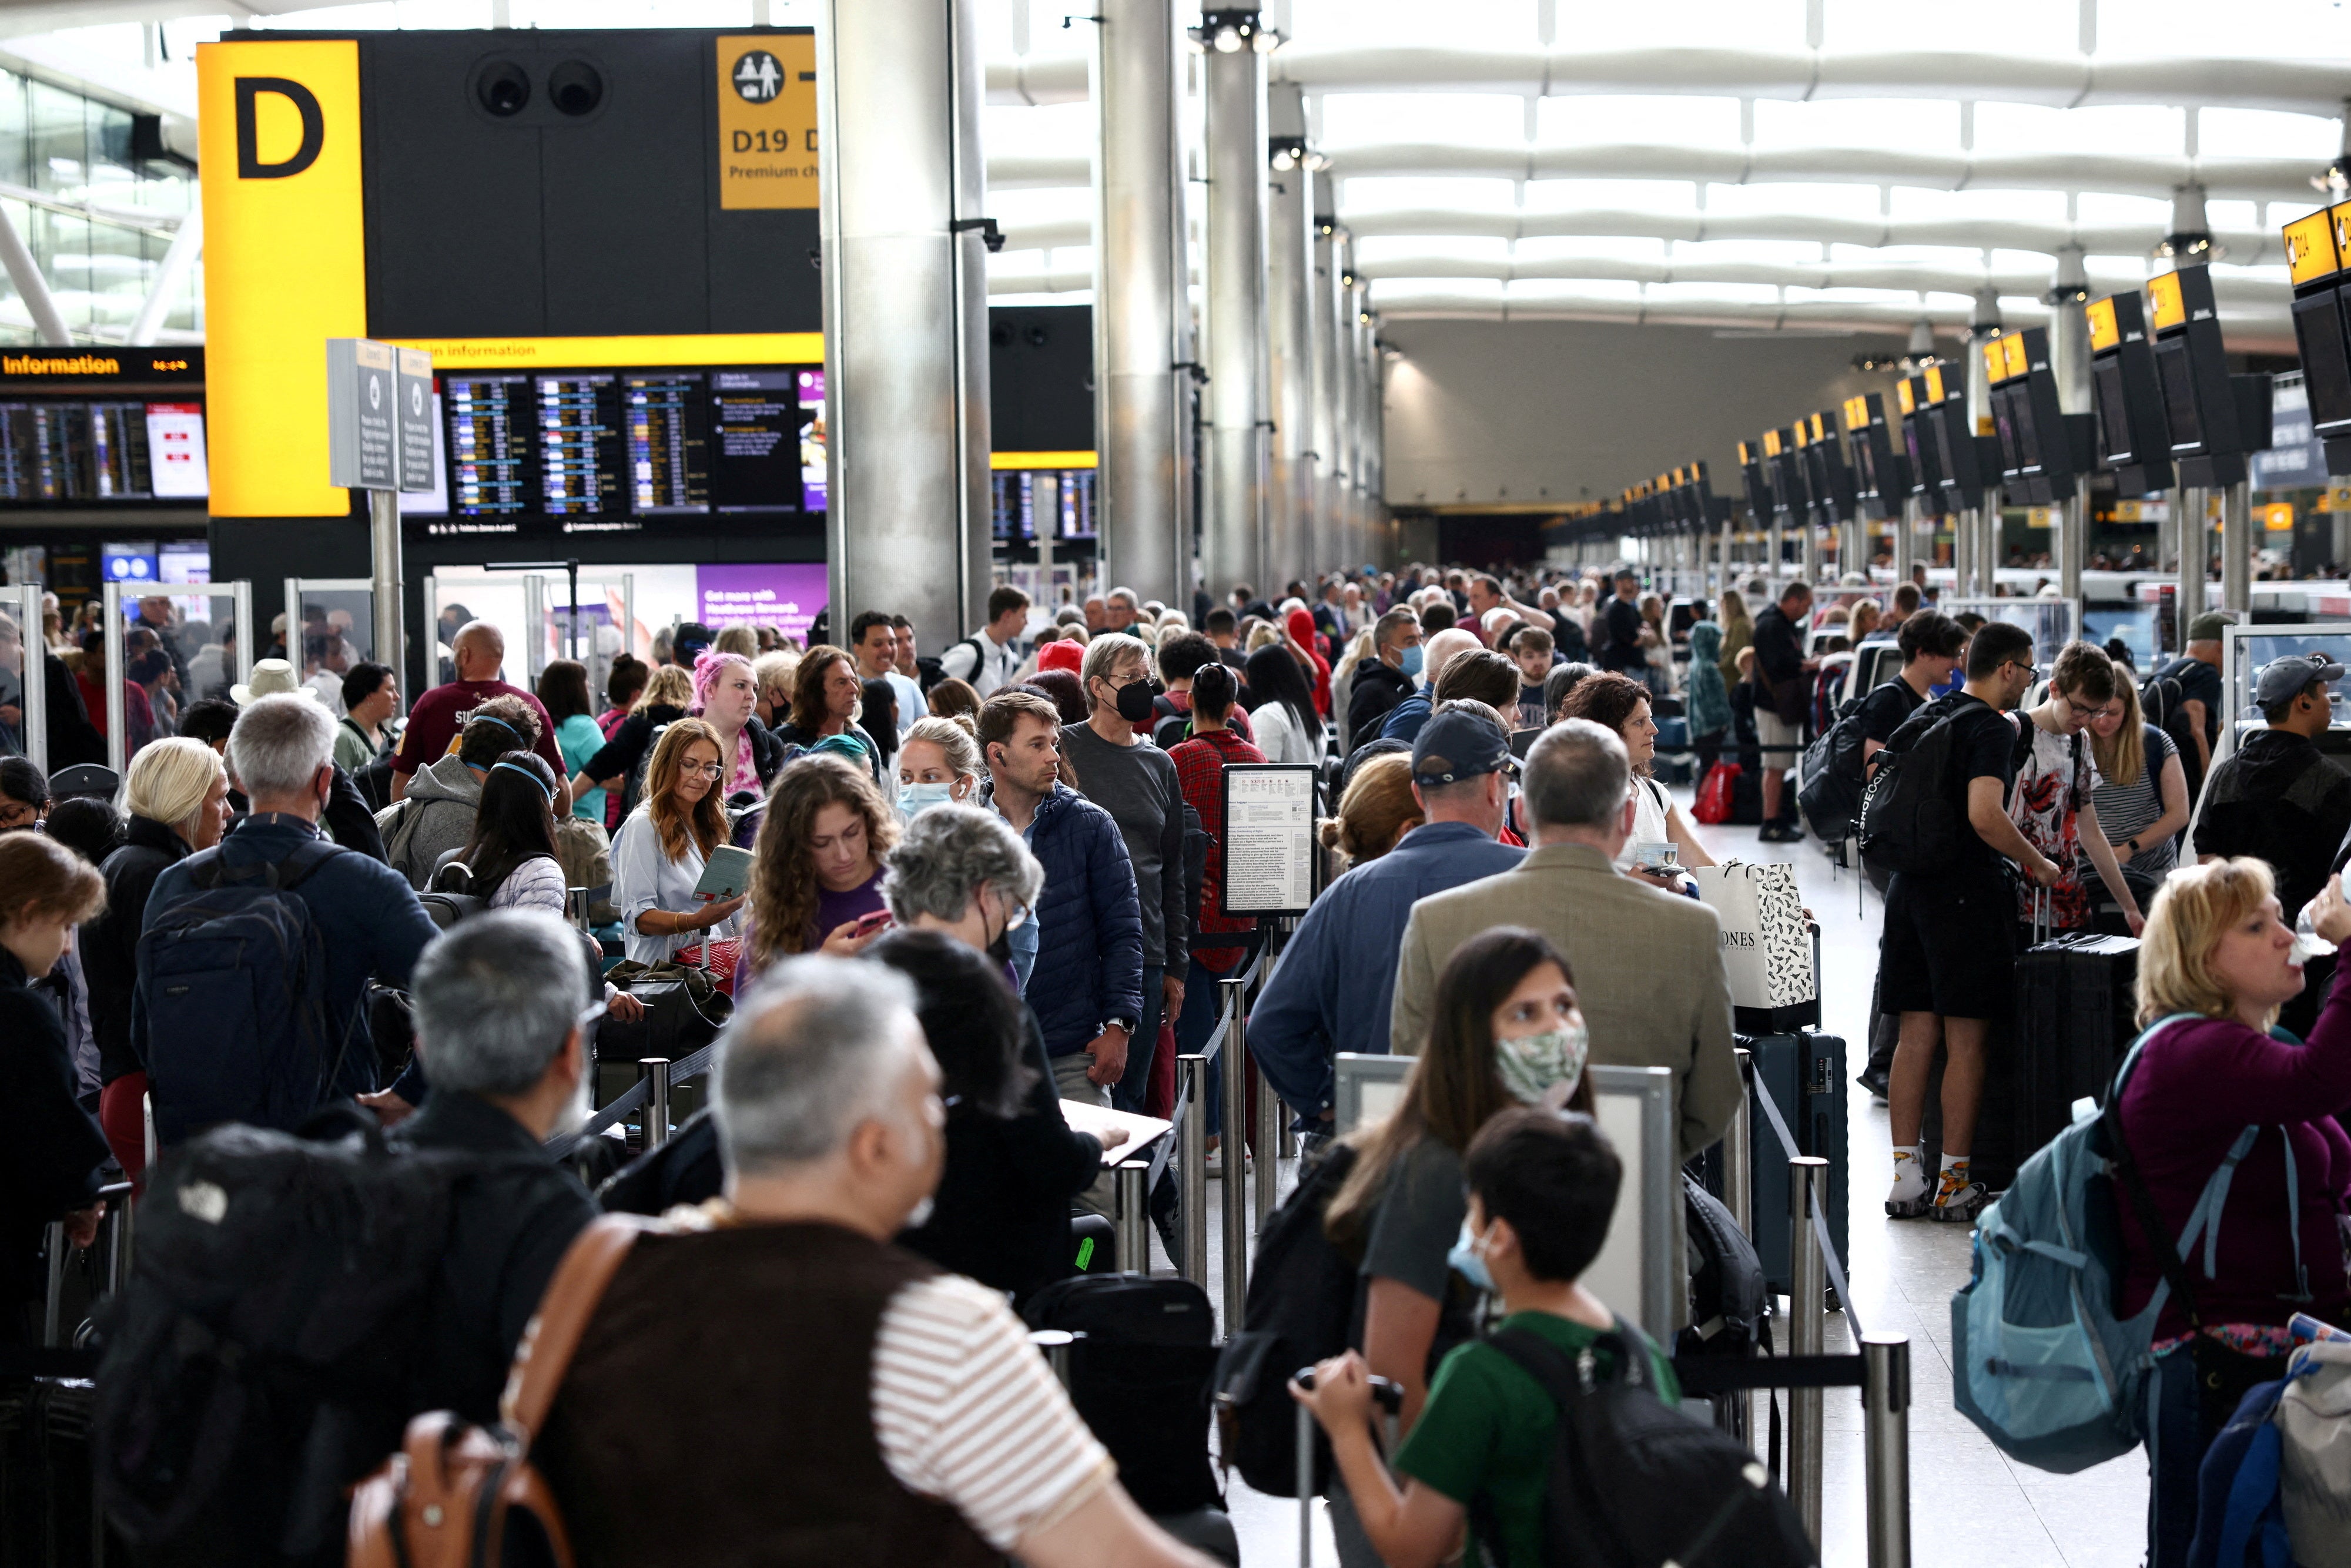 File: Passengers queue inside the departures terminal of Terminal 2 at Heathrow Airport